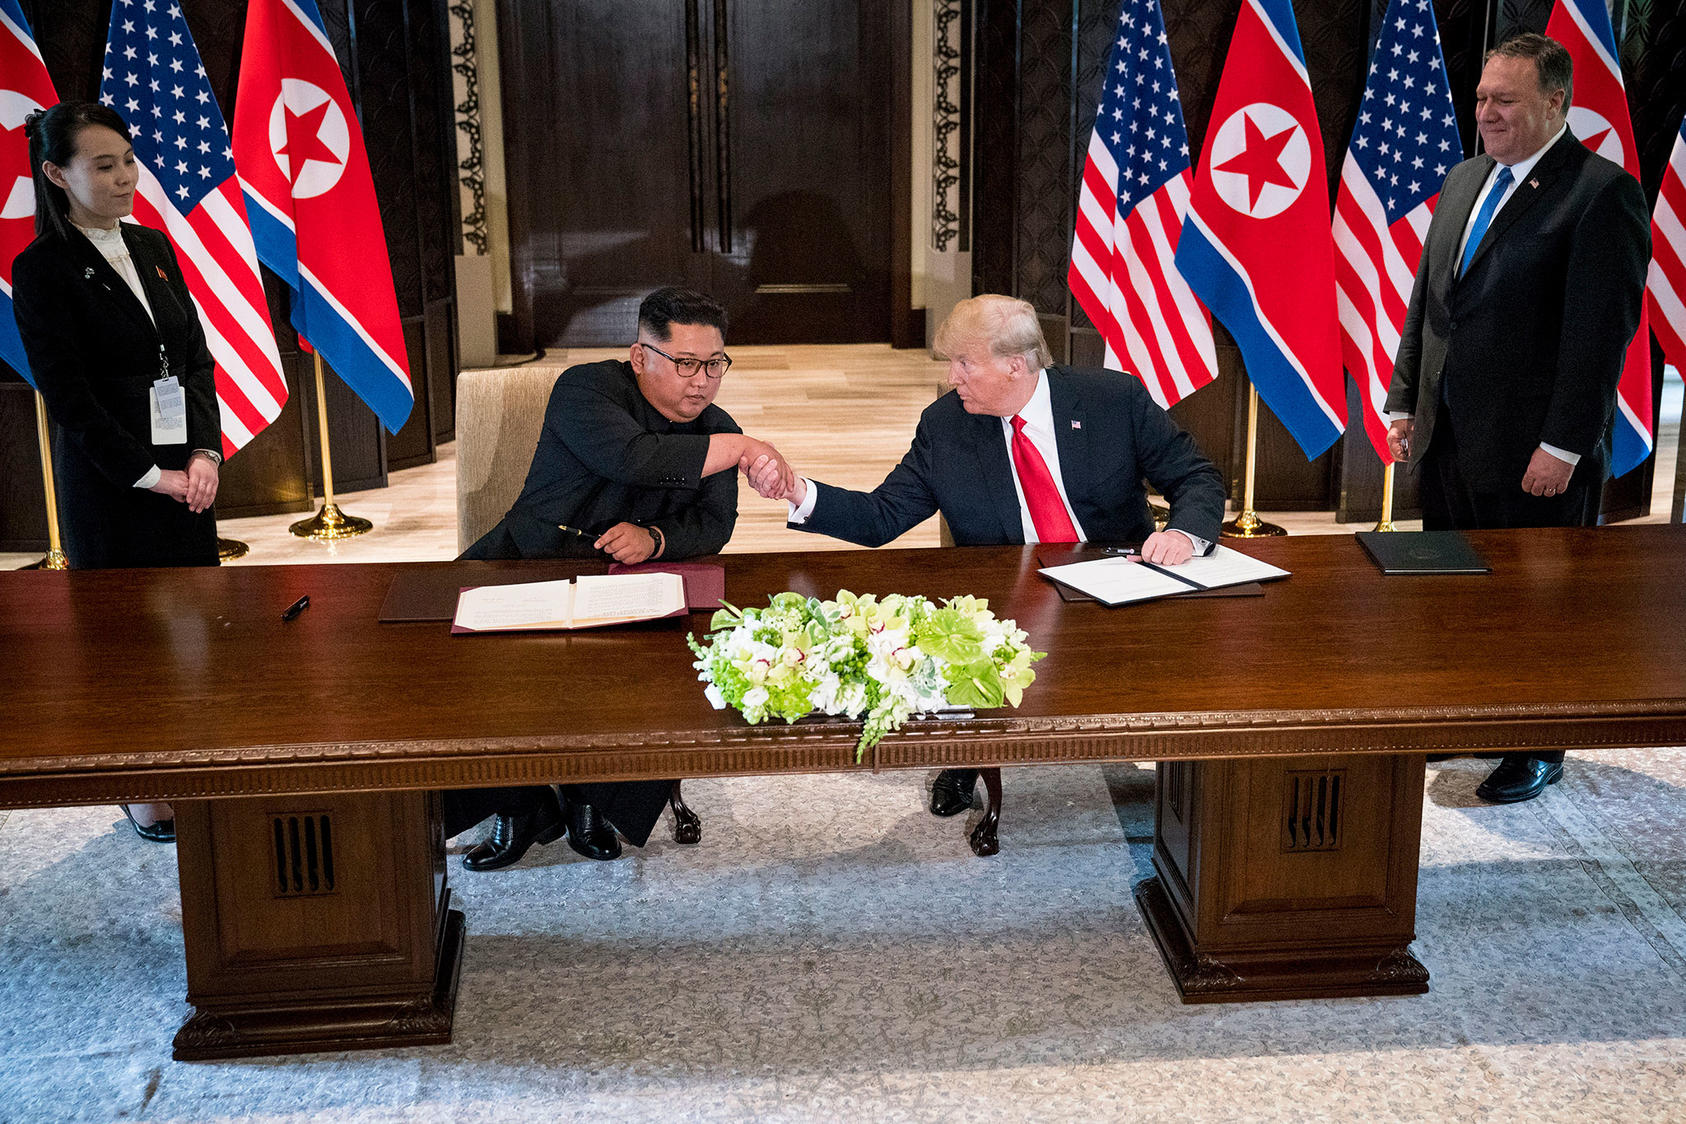 President Donald Trump and Kim Jong Un, North Korea's leader, shake hands during a document signing ceremony on Sentosa Island in Singapore, June 12, 2018. (Doug Mills/The New York Times)